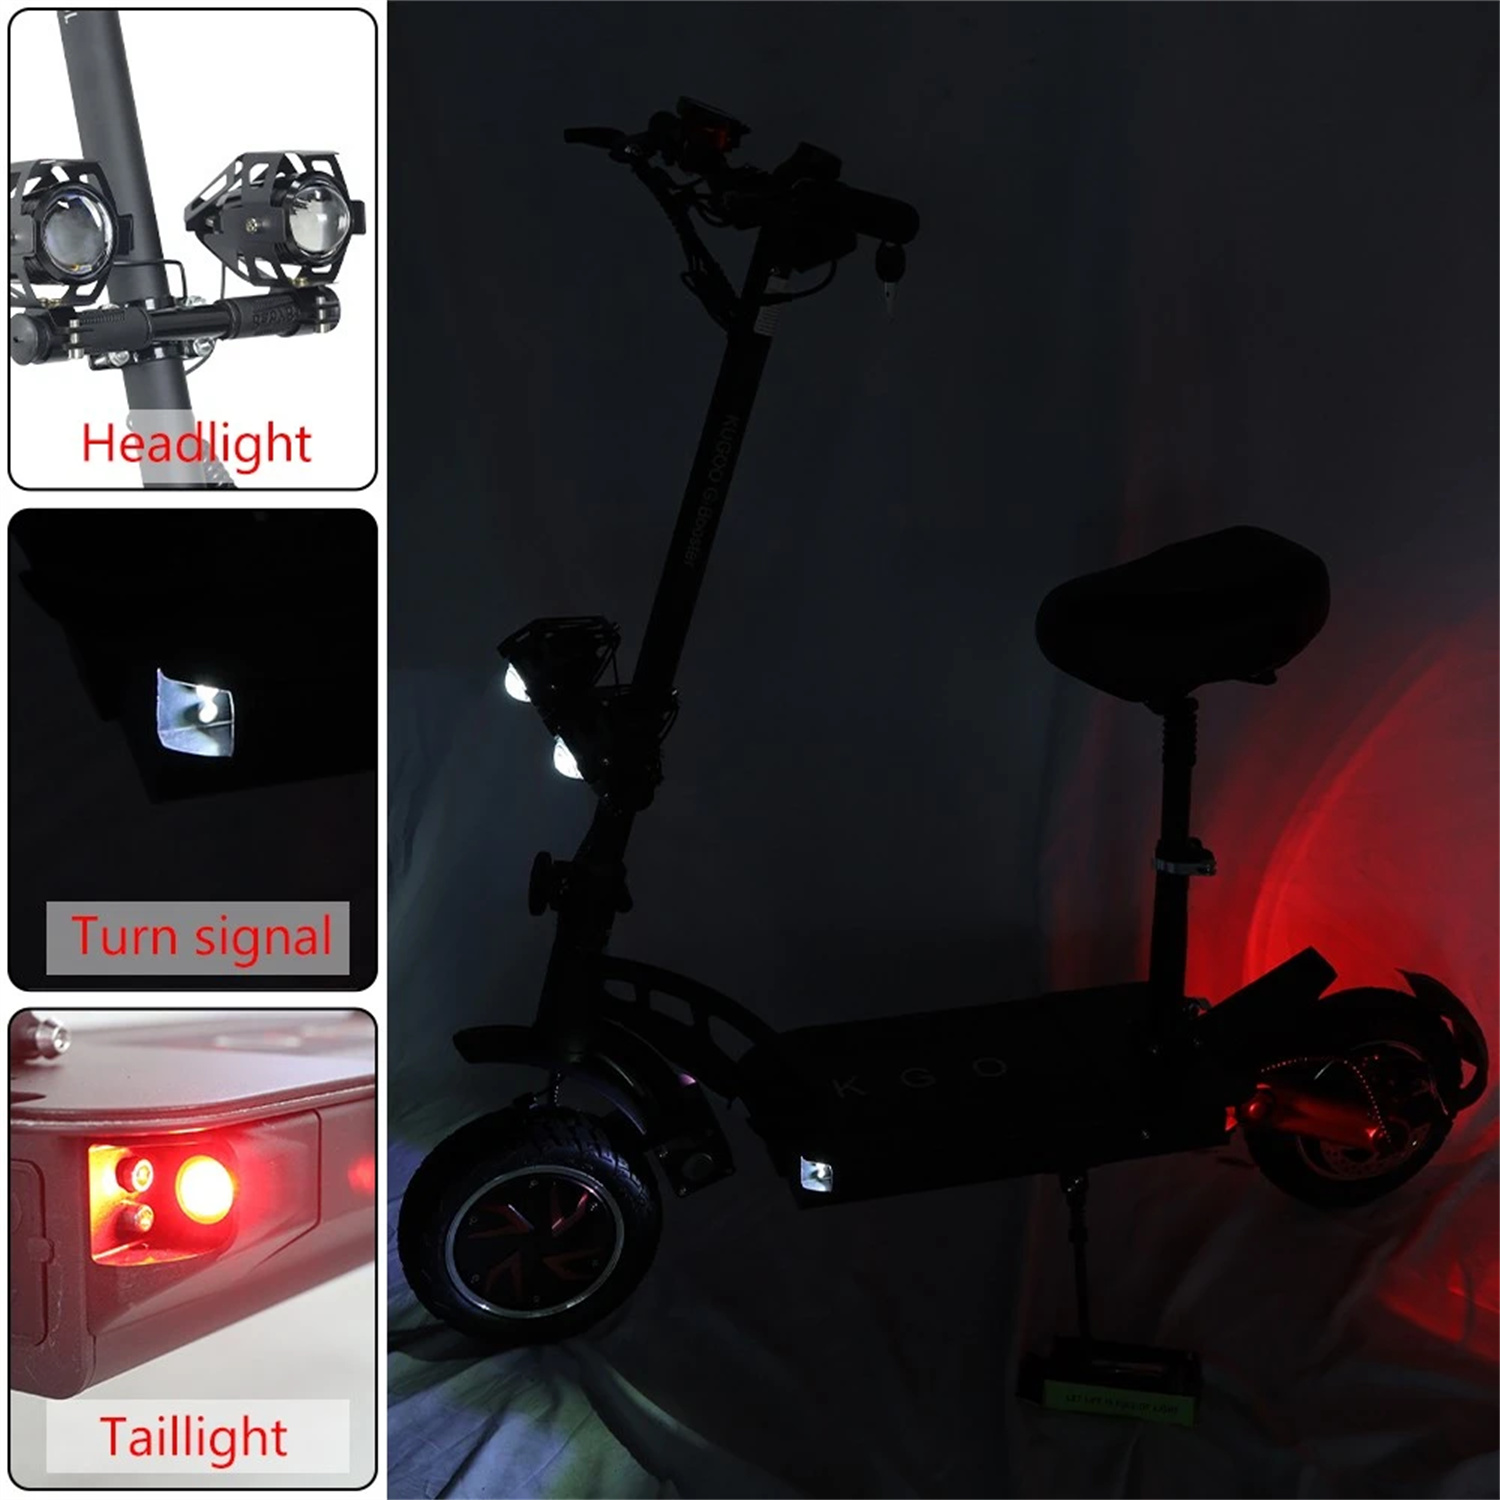 KUGOO G-Booster Folding Electric Scooter 10 Inch Tires 2*800W Dual Motors 3 Speed Modes Max 55Km/h Speed 48V 23AH Battery for 85KM Range Max Load 120KG Dual Disc Brakes with Seat